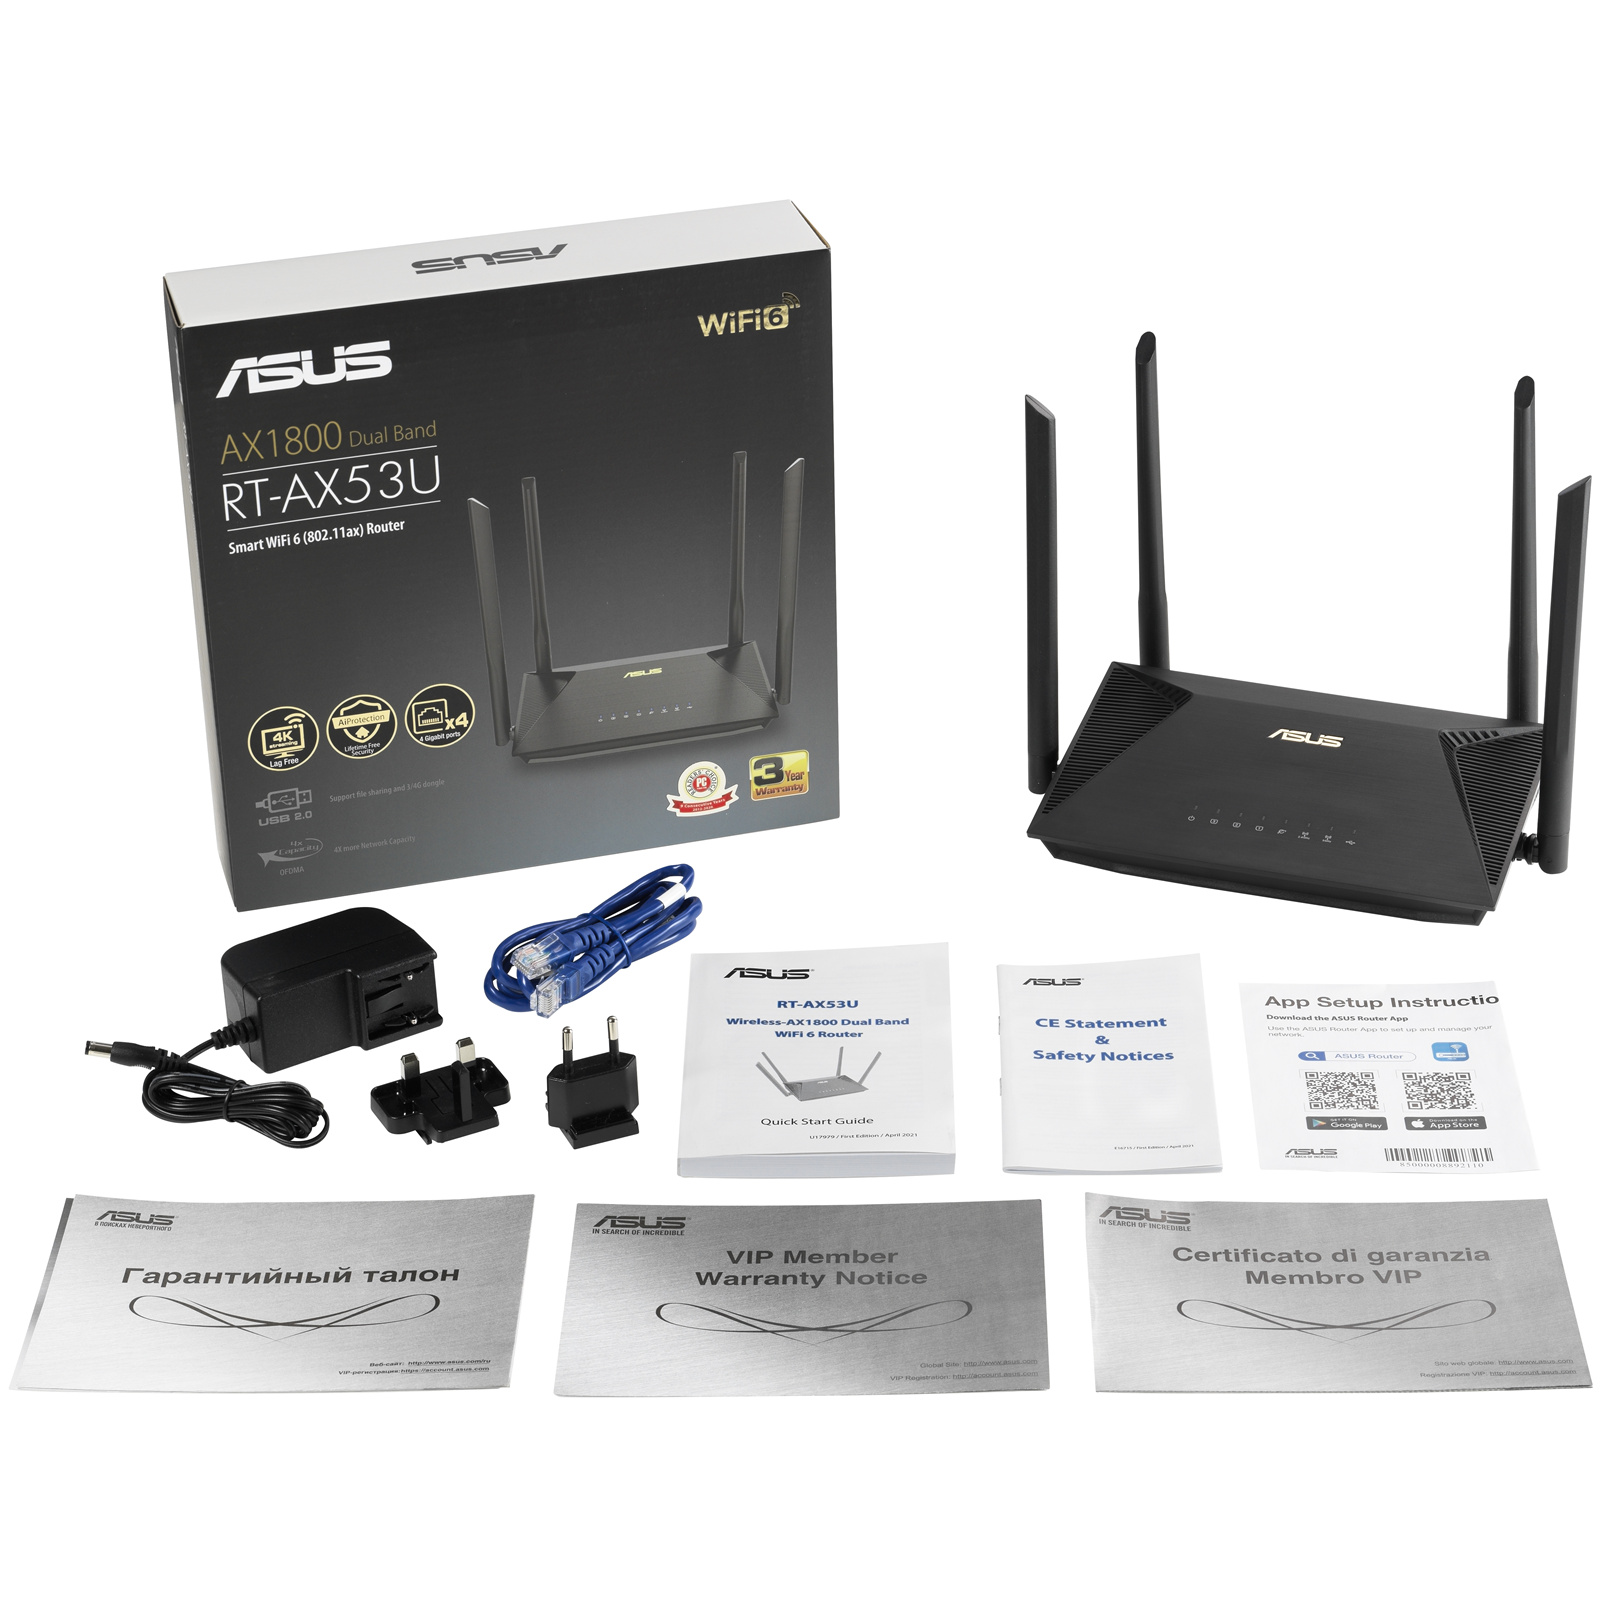 ( -AX53U AX Router... Dual Band (AX1800) online WiFi Extendable ASUS the RT-AX53U RT 6 ) Buy